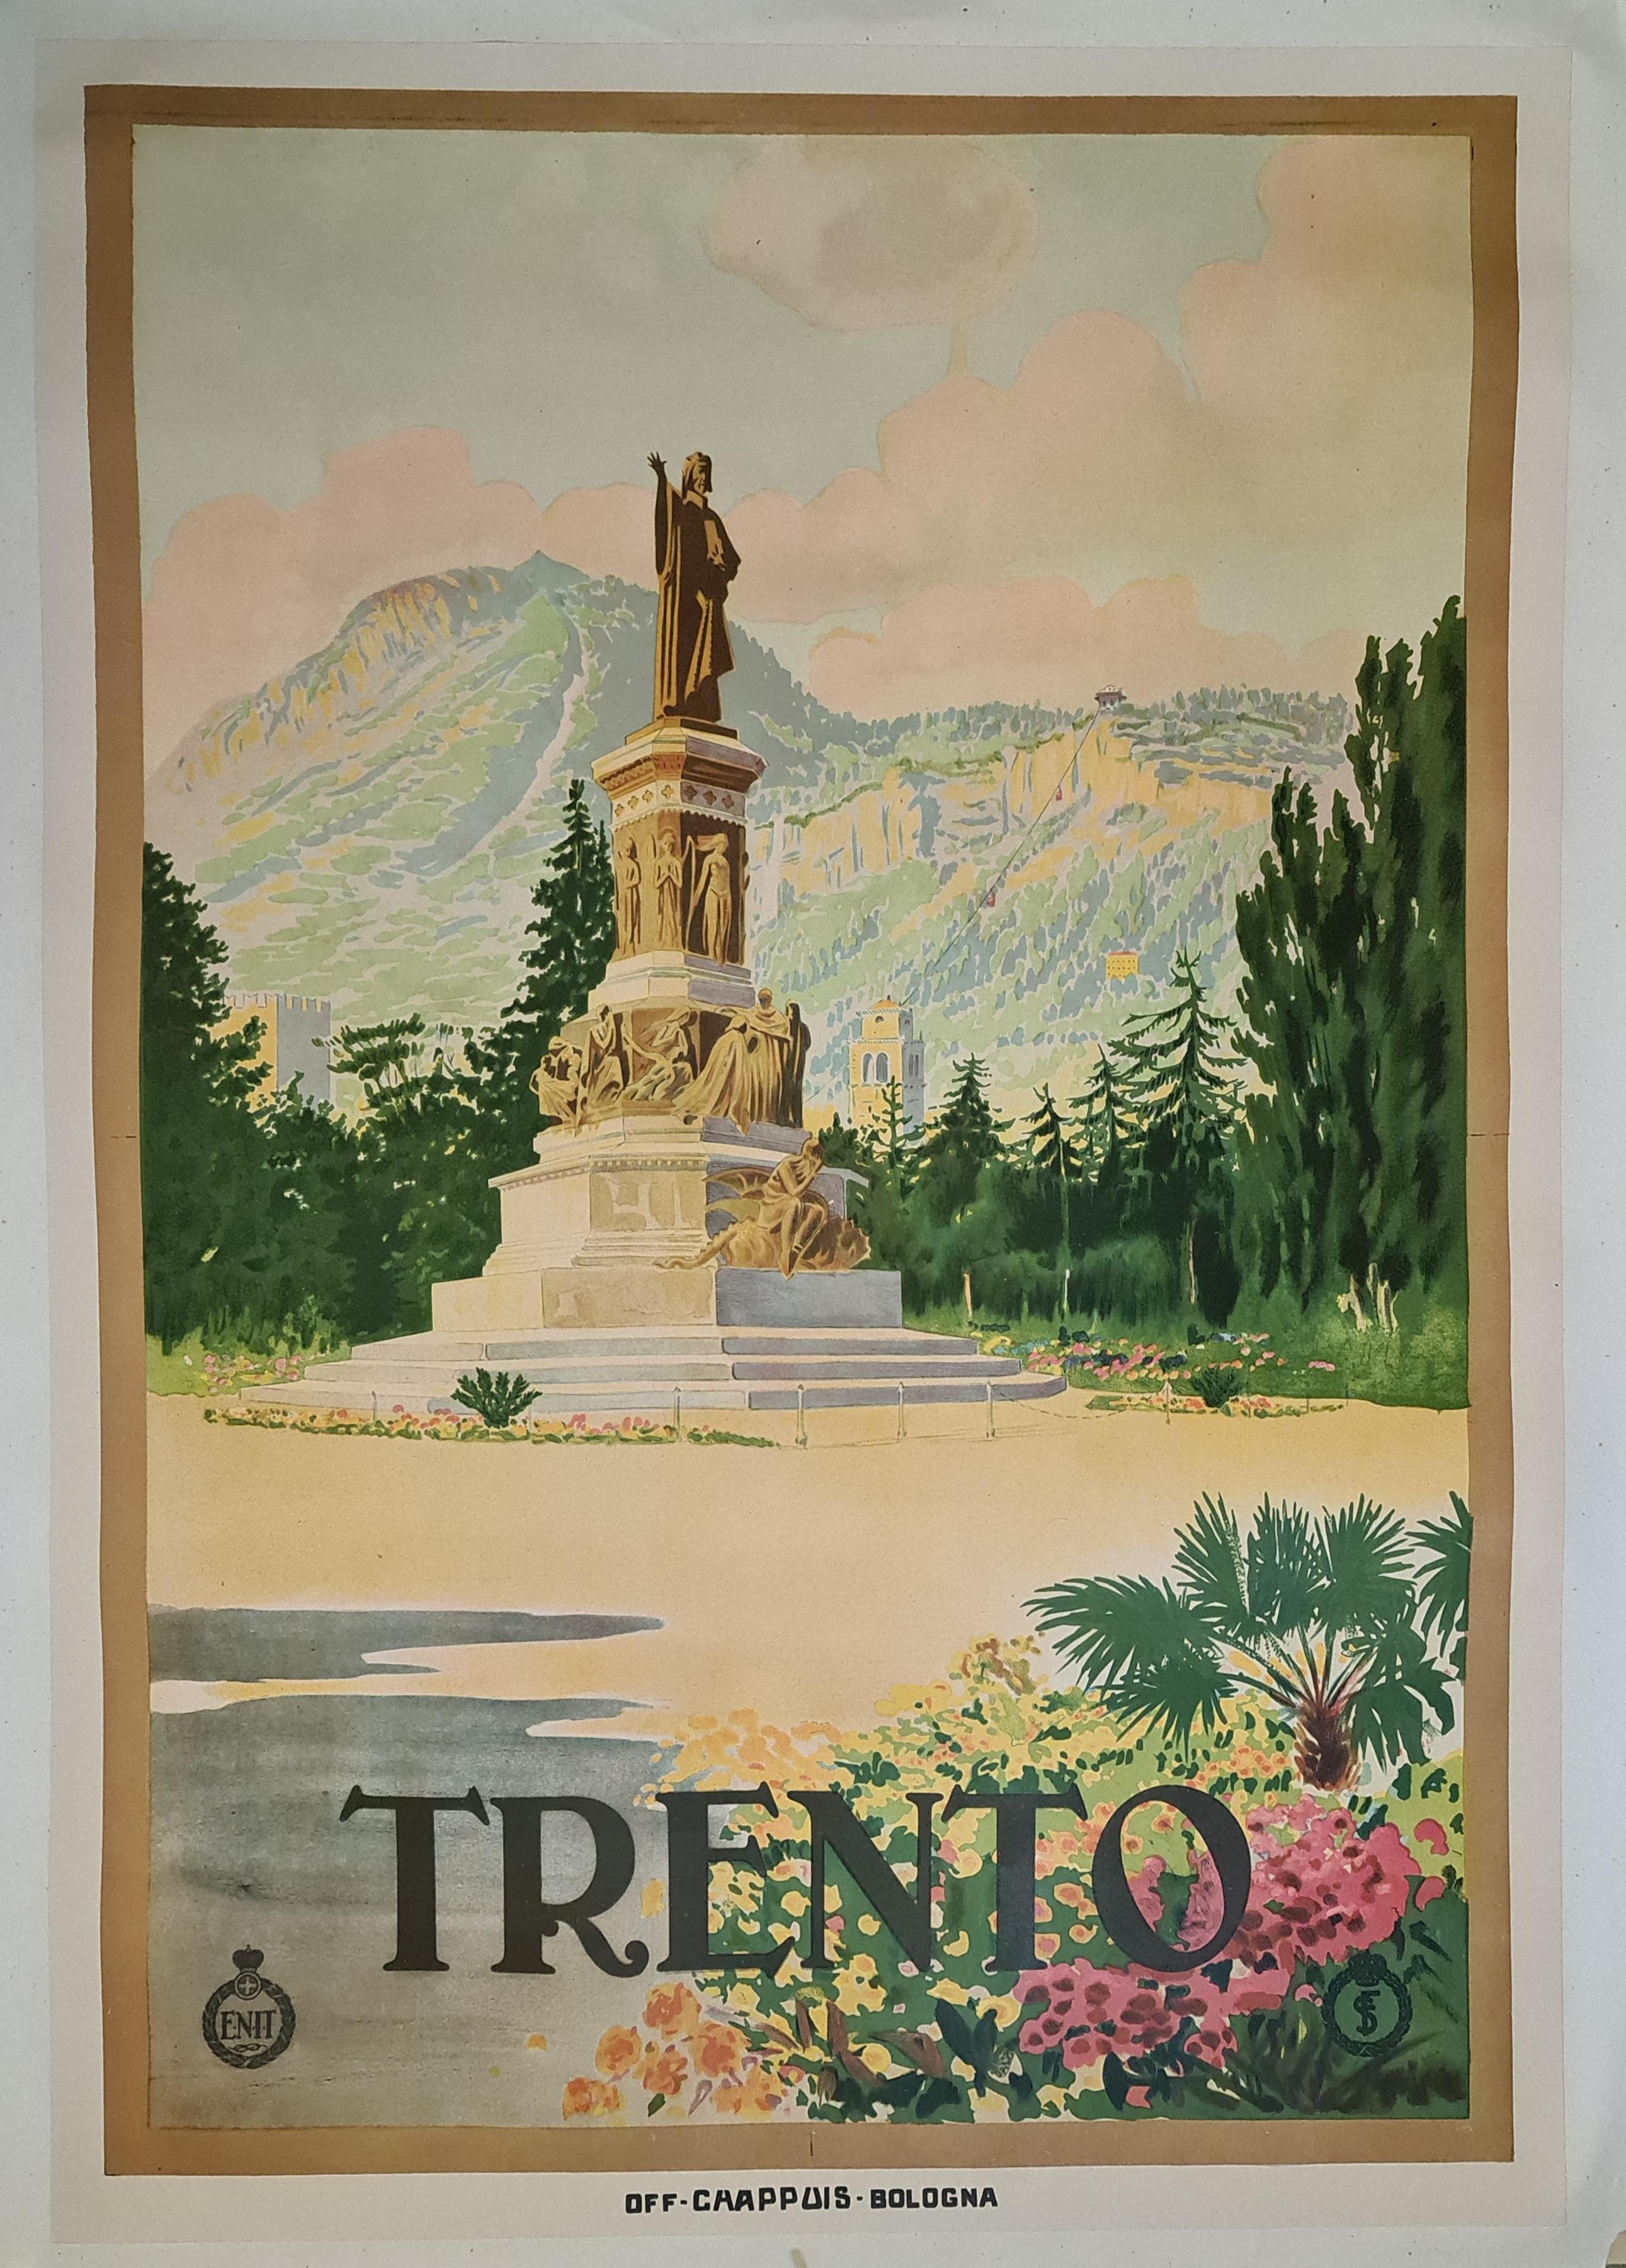 Original travel poster promoting the Alpine city of Trento in northern Italy, published by ENIT, the Italian tourist board, and the Italian railroads. It features a beautiful illustration of the 1896 historical monument, the statue of Dante, the